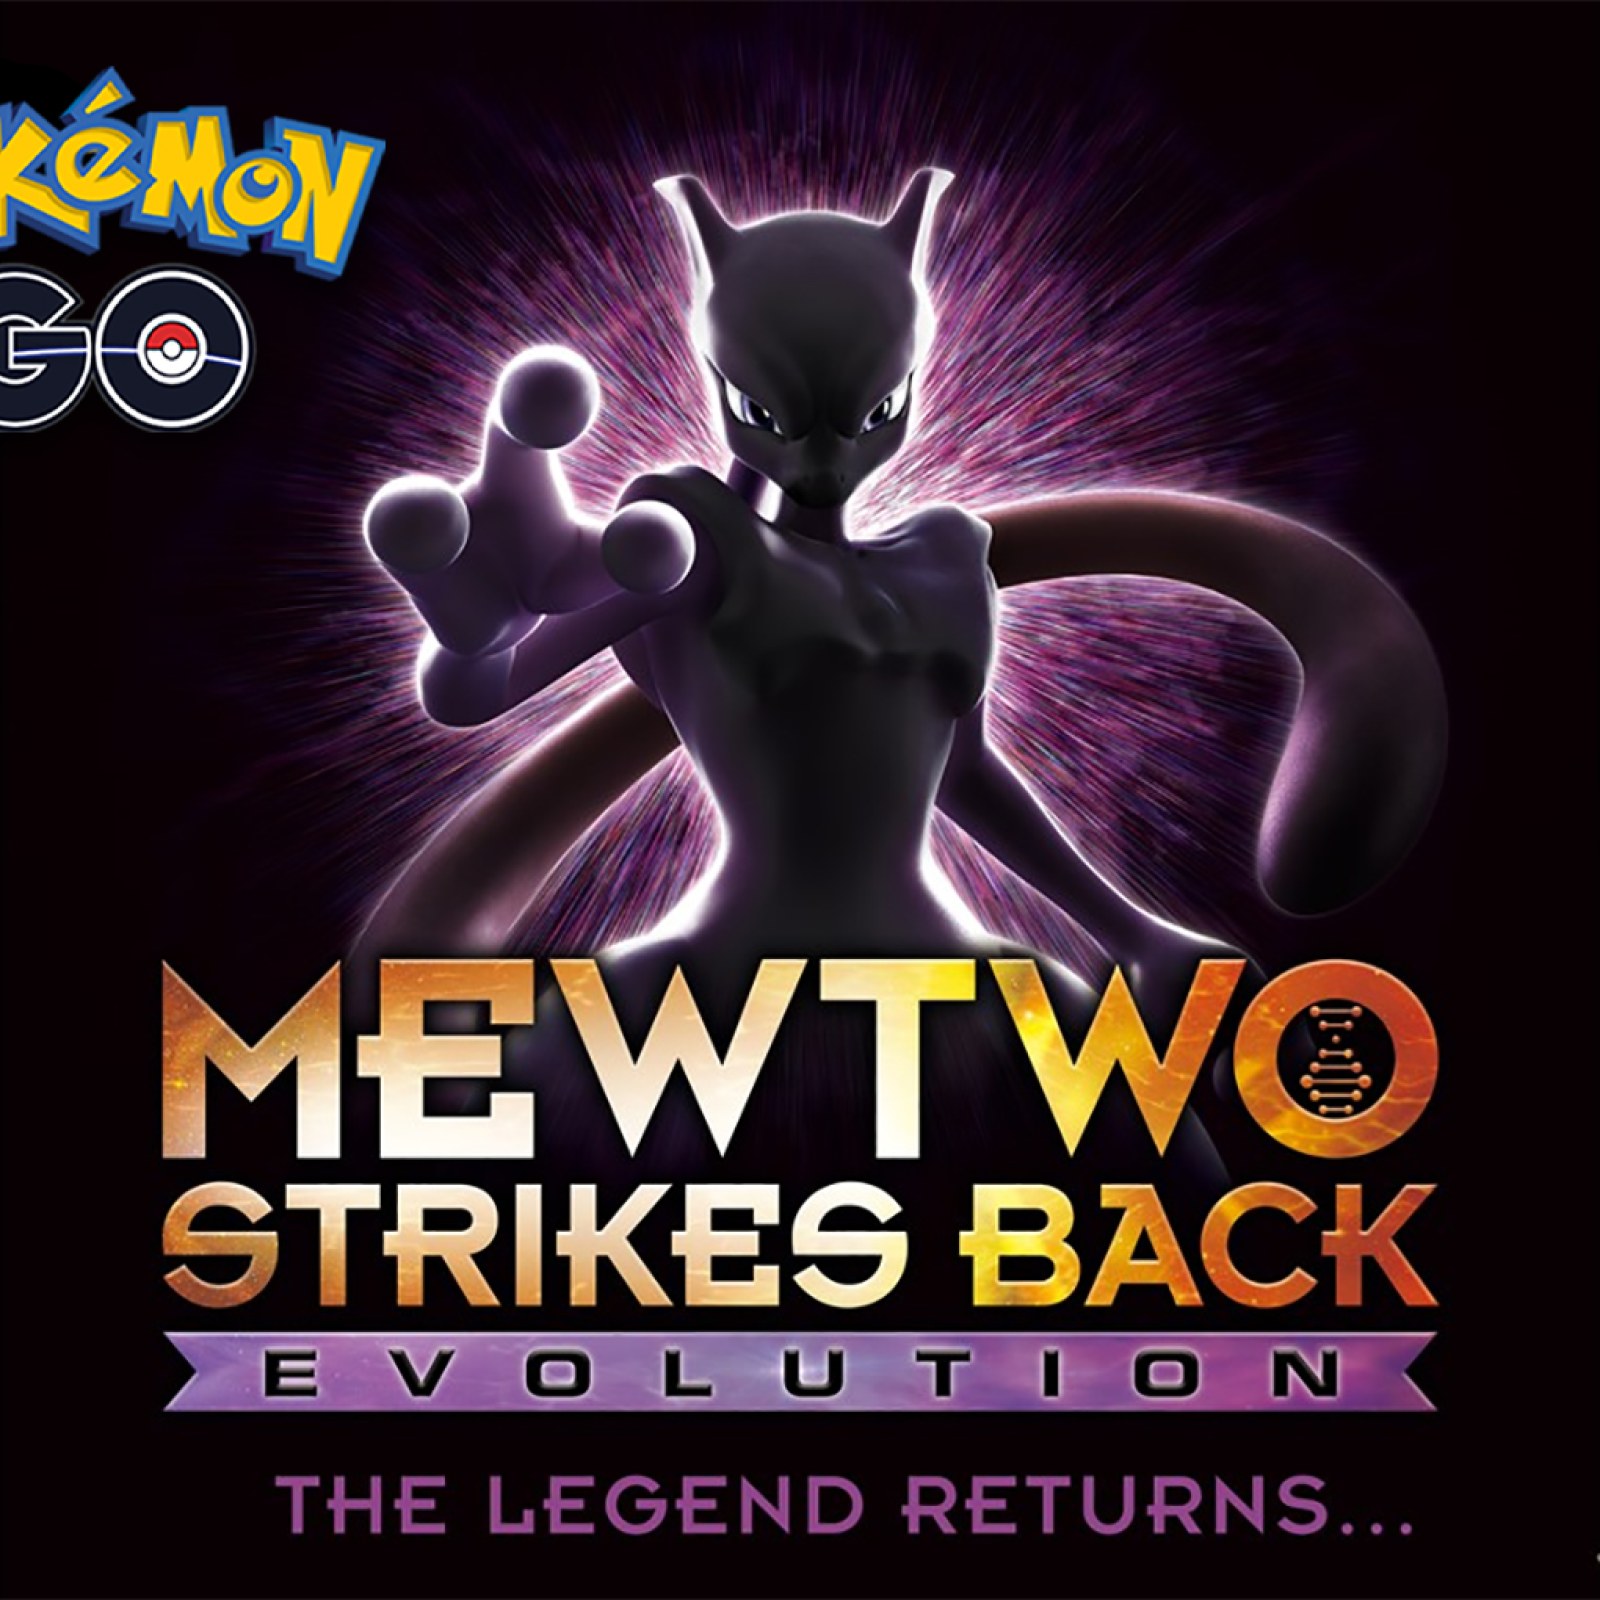 Pokemon Go : Armored Mewtwo coming to raids, Raid Guide & Best